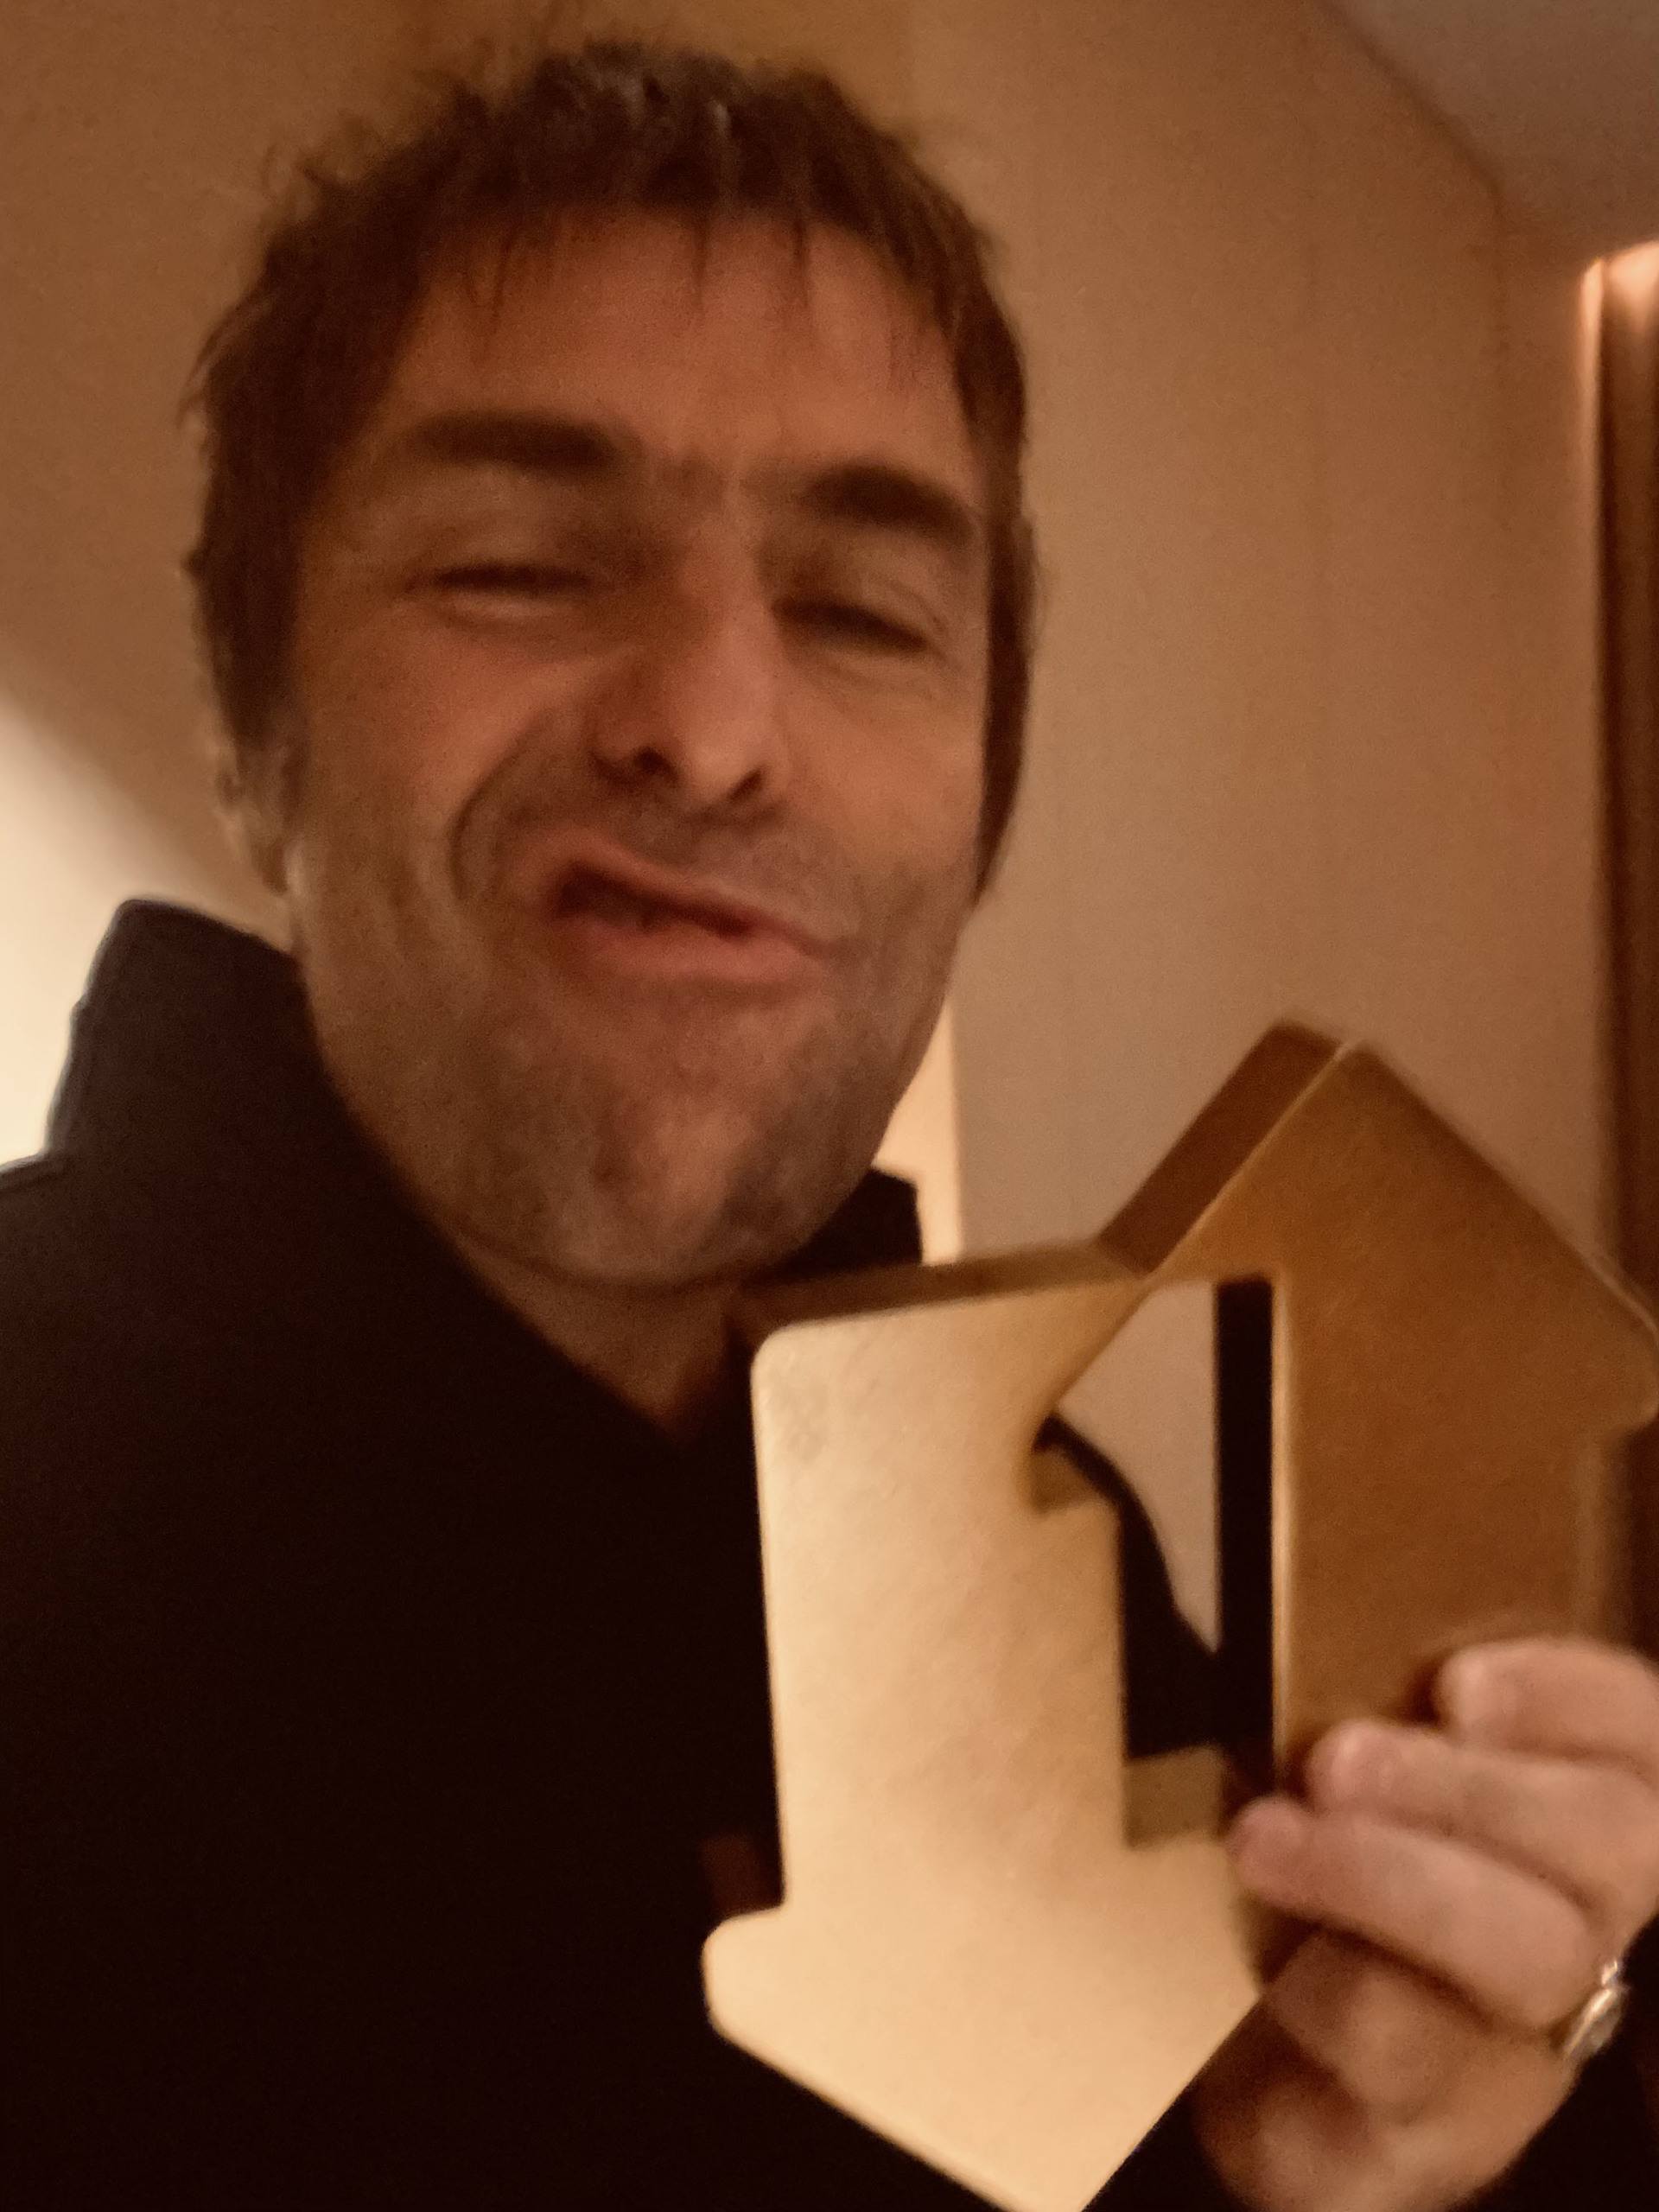 Liam Gallagher with his official number one album award for Knebworth 22.